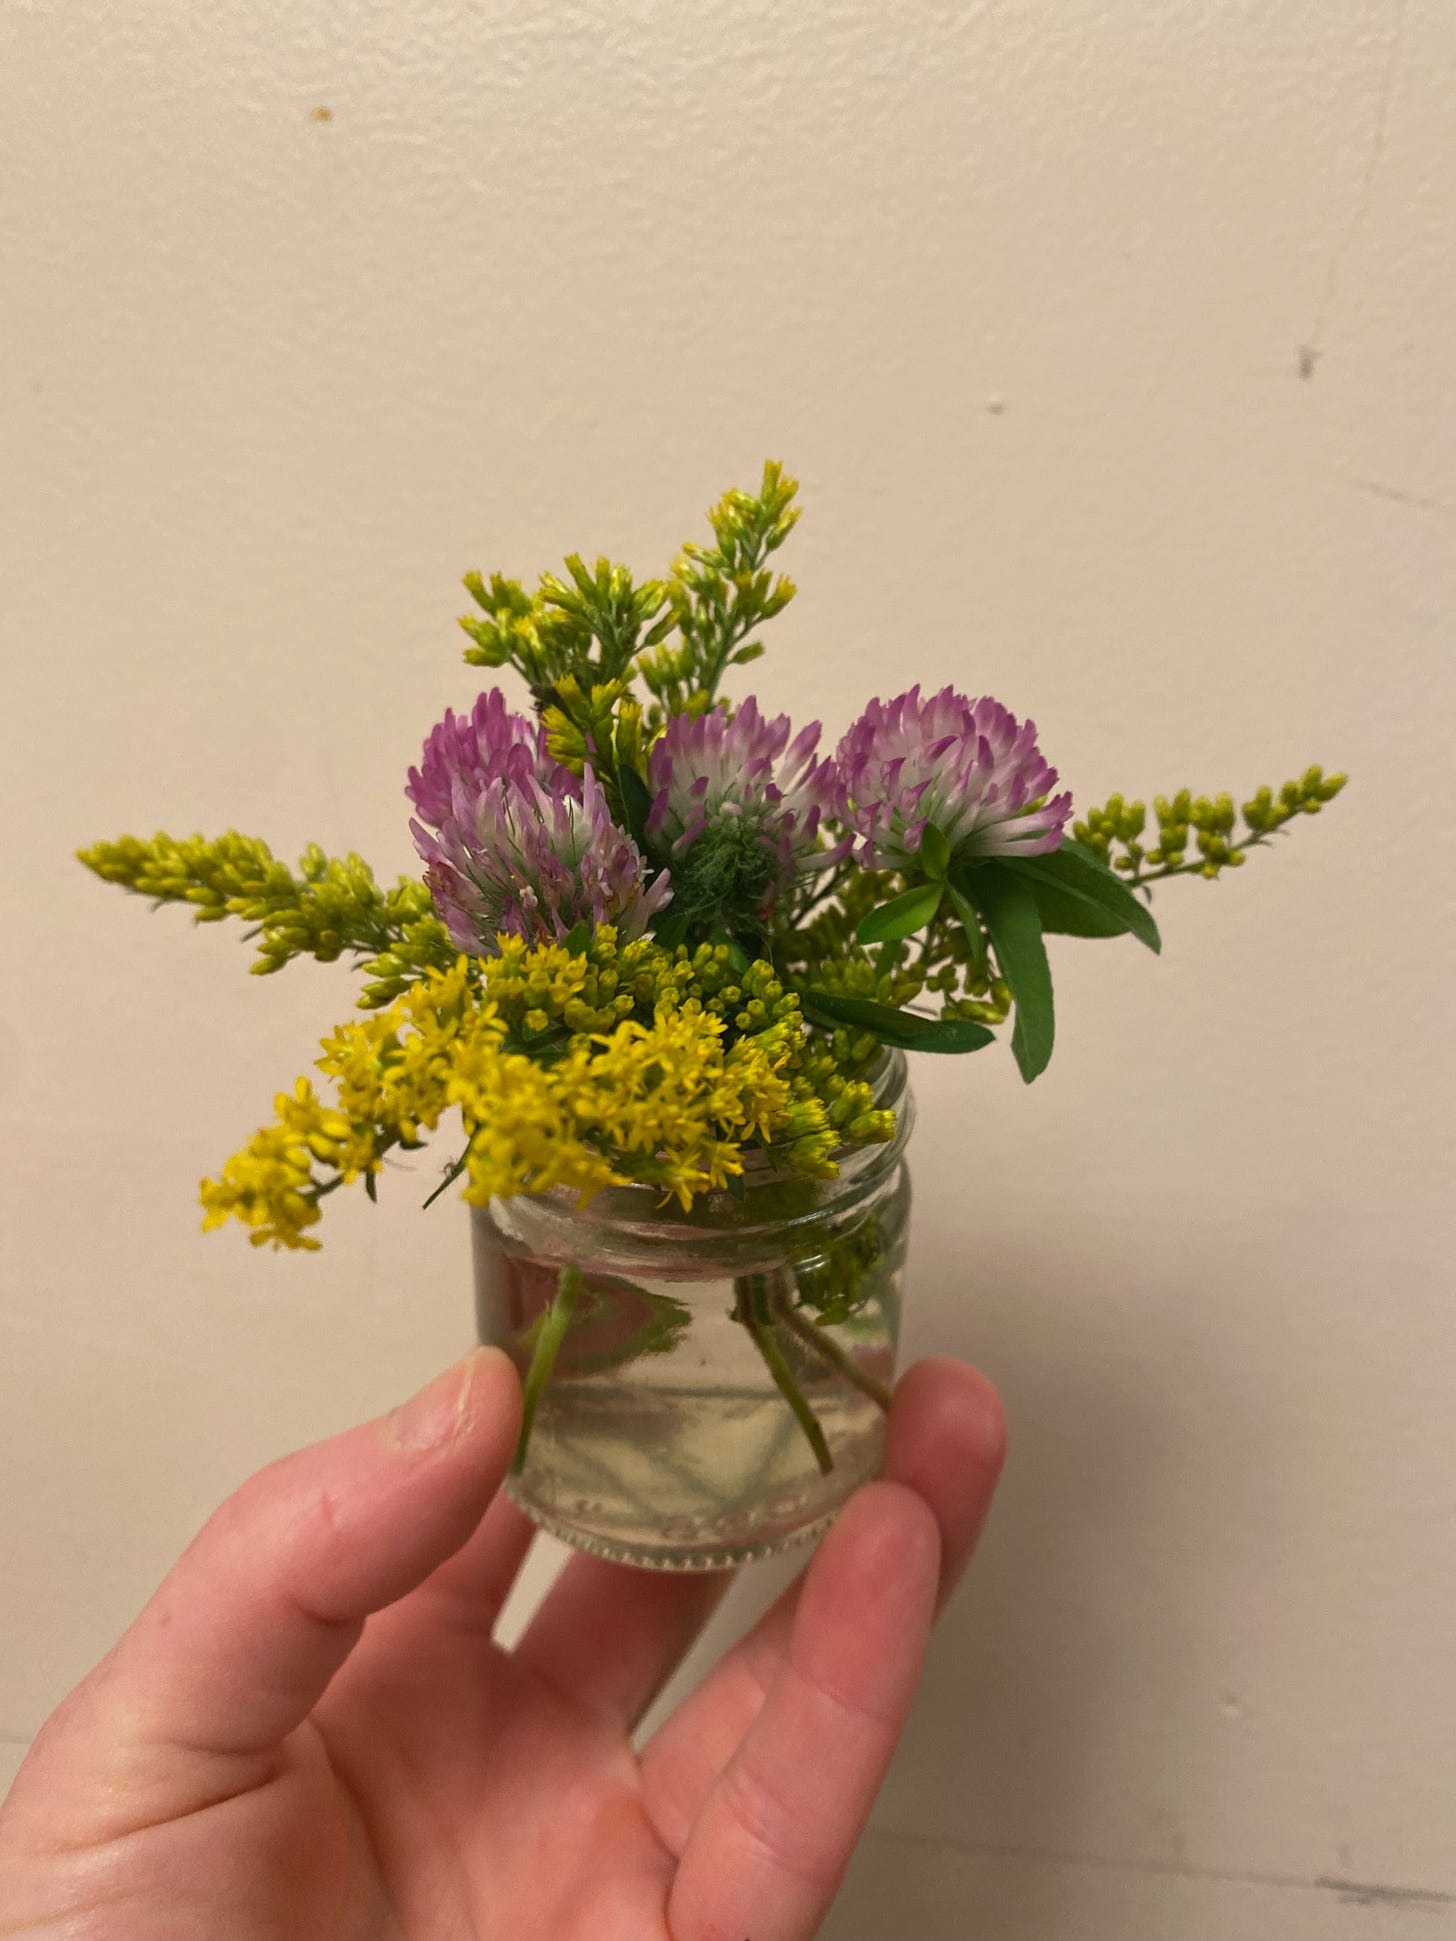 My hand holding up a tiny glass jar with a few springs of goldenrod and clover in front of a white wall.